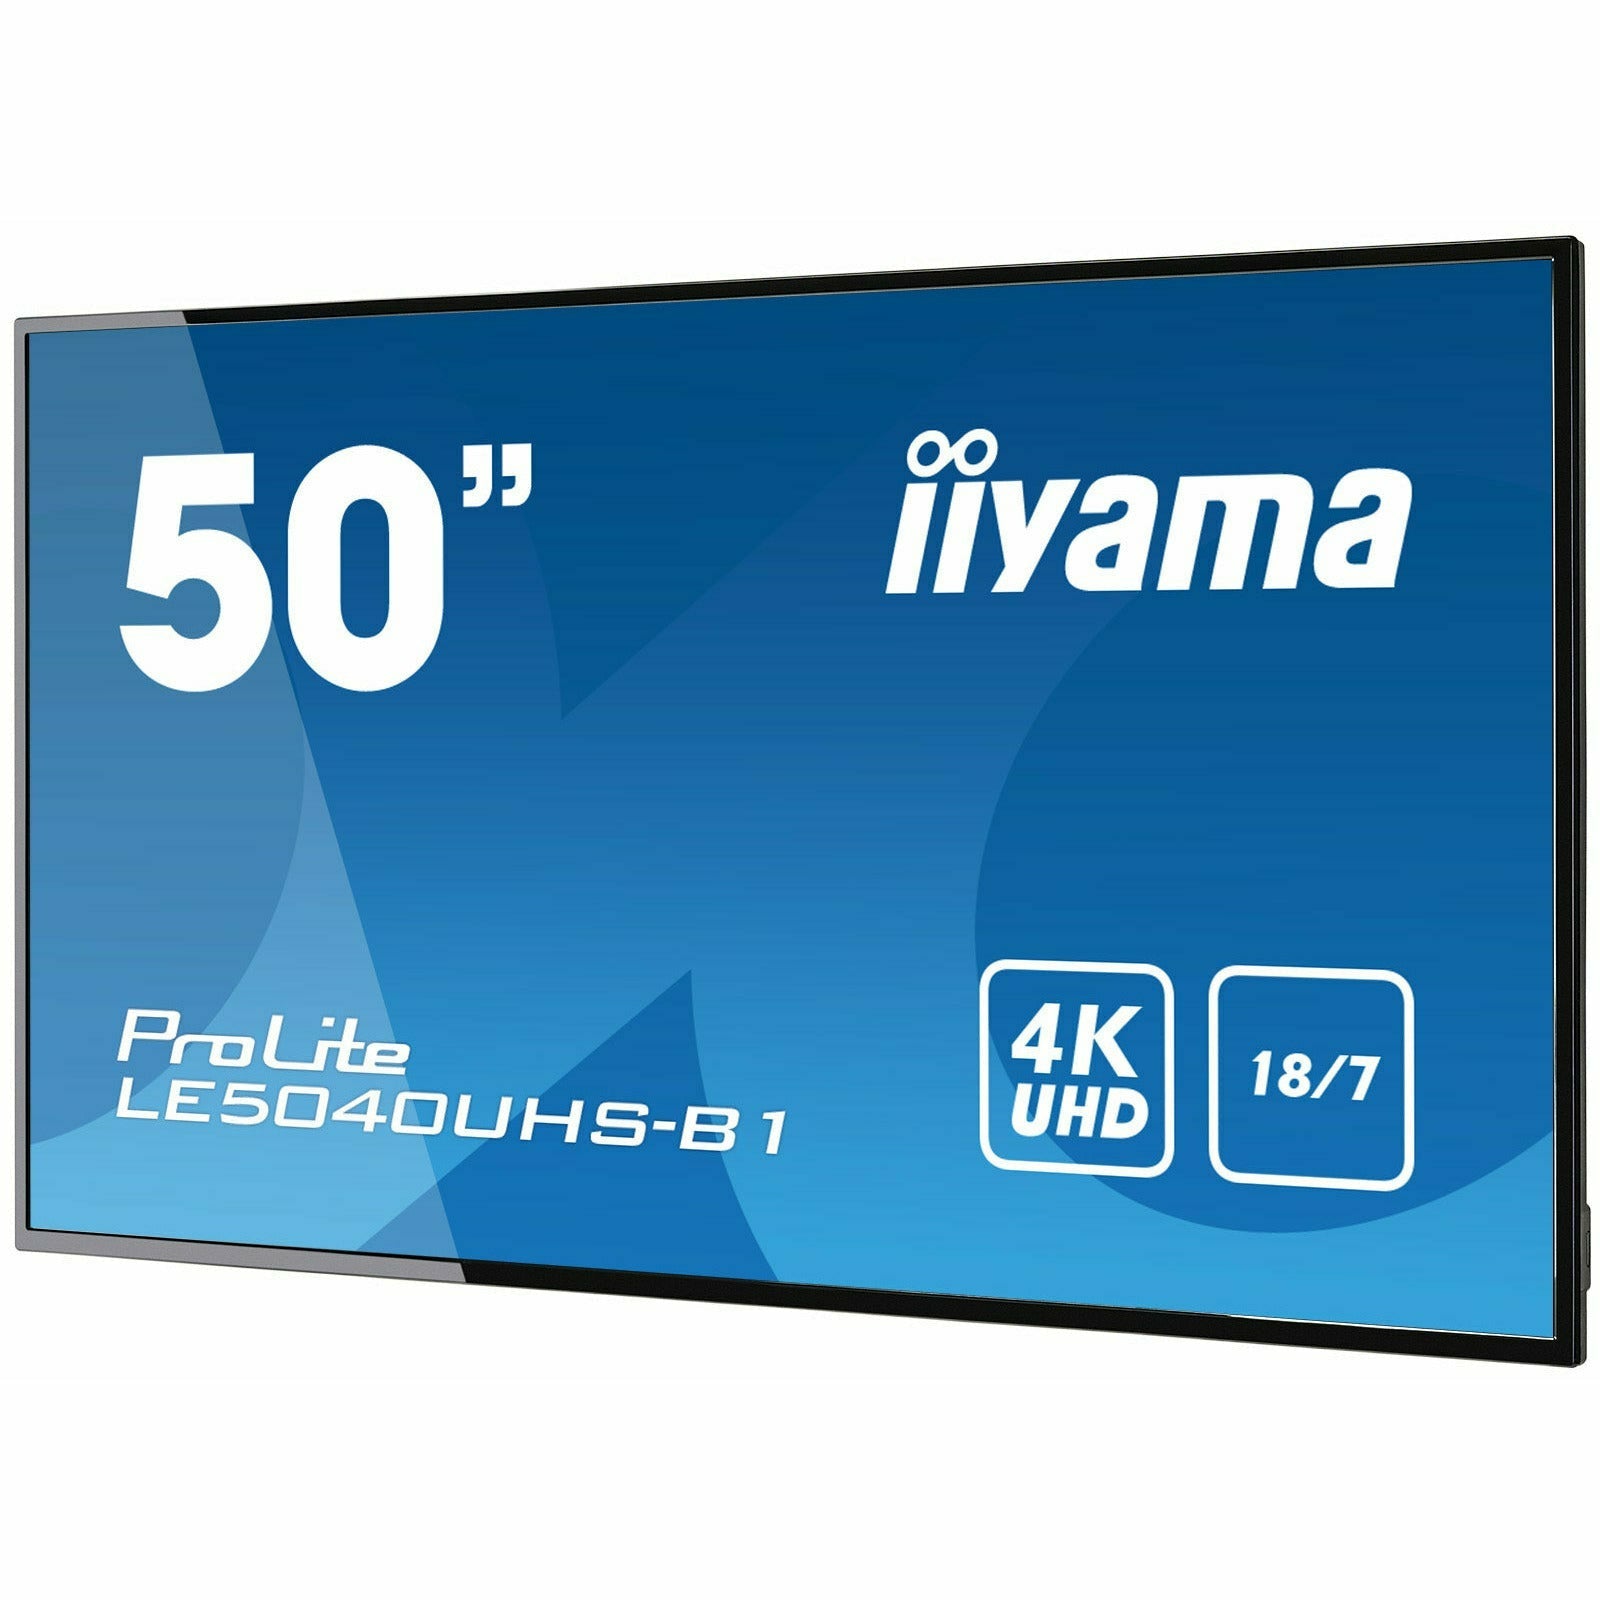 iiyama ProLite LE5040UHS-B1 50" Professional Digital Signage display with a 18/7 operating time and a 4K UHD resolution